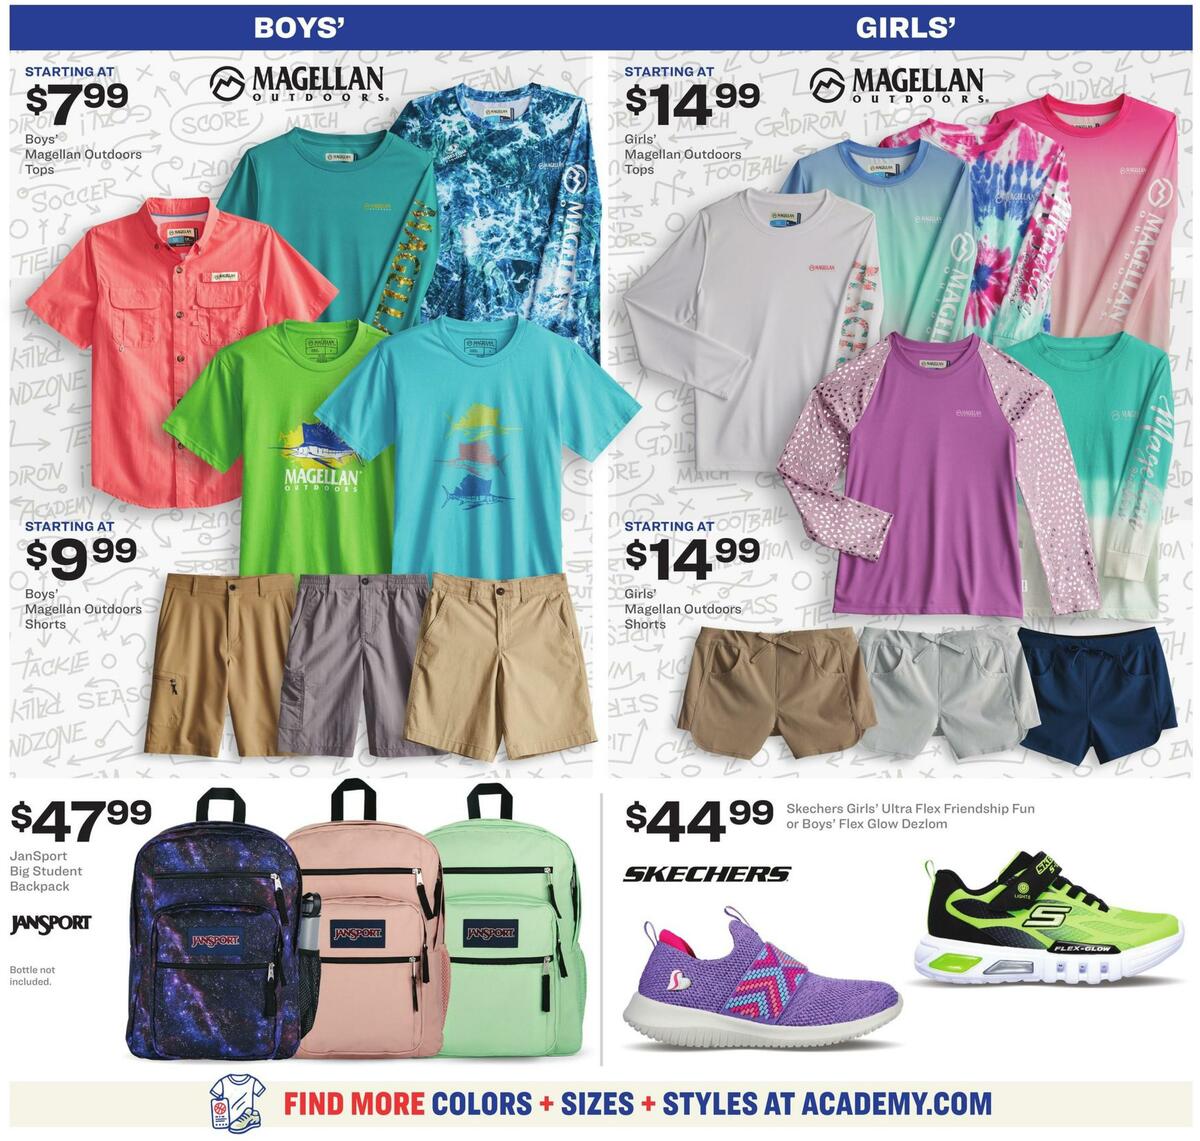 Academy Sports + Outdoors Kids Ad Weekly Ad from July 19